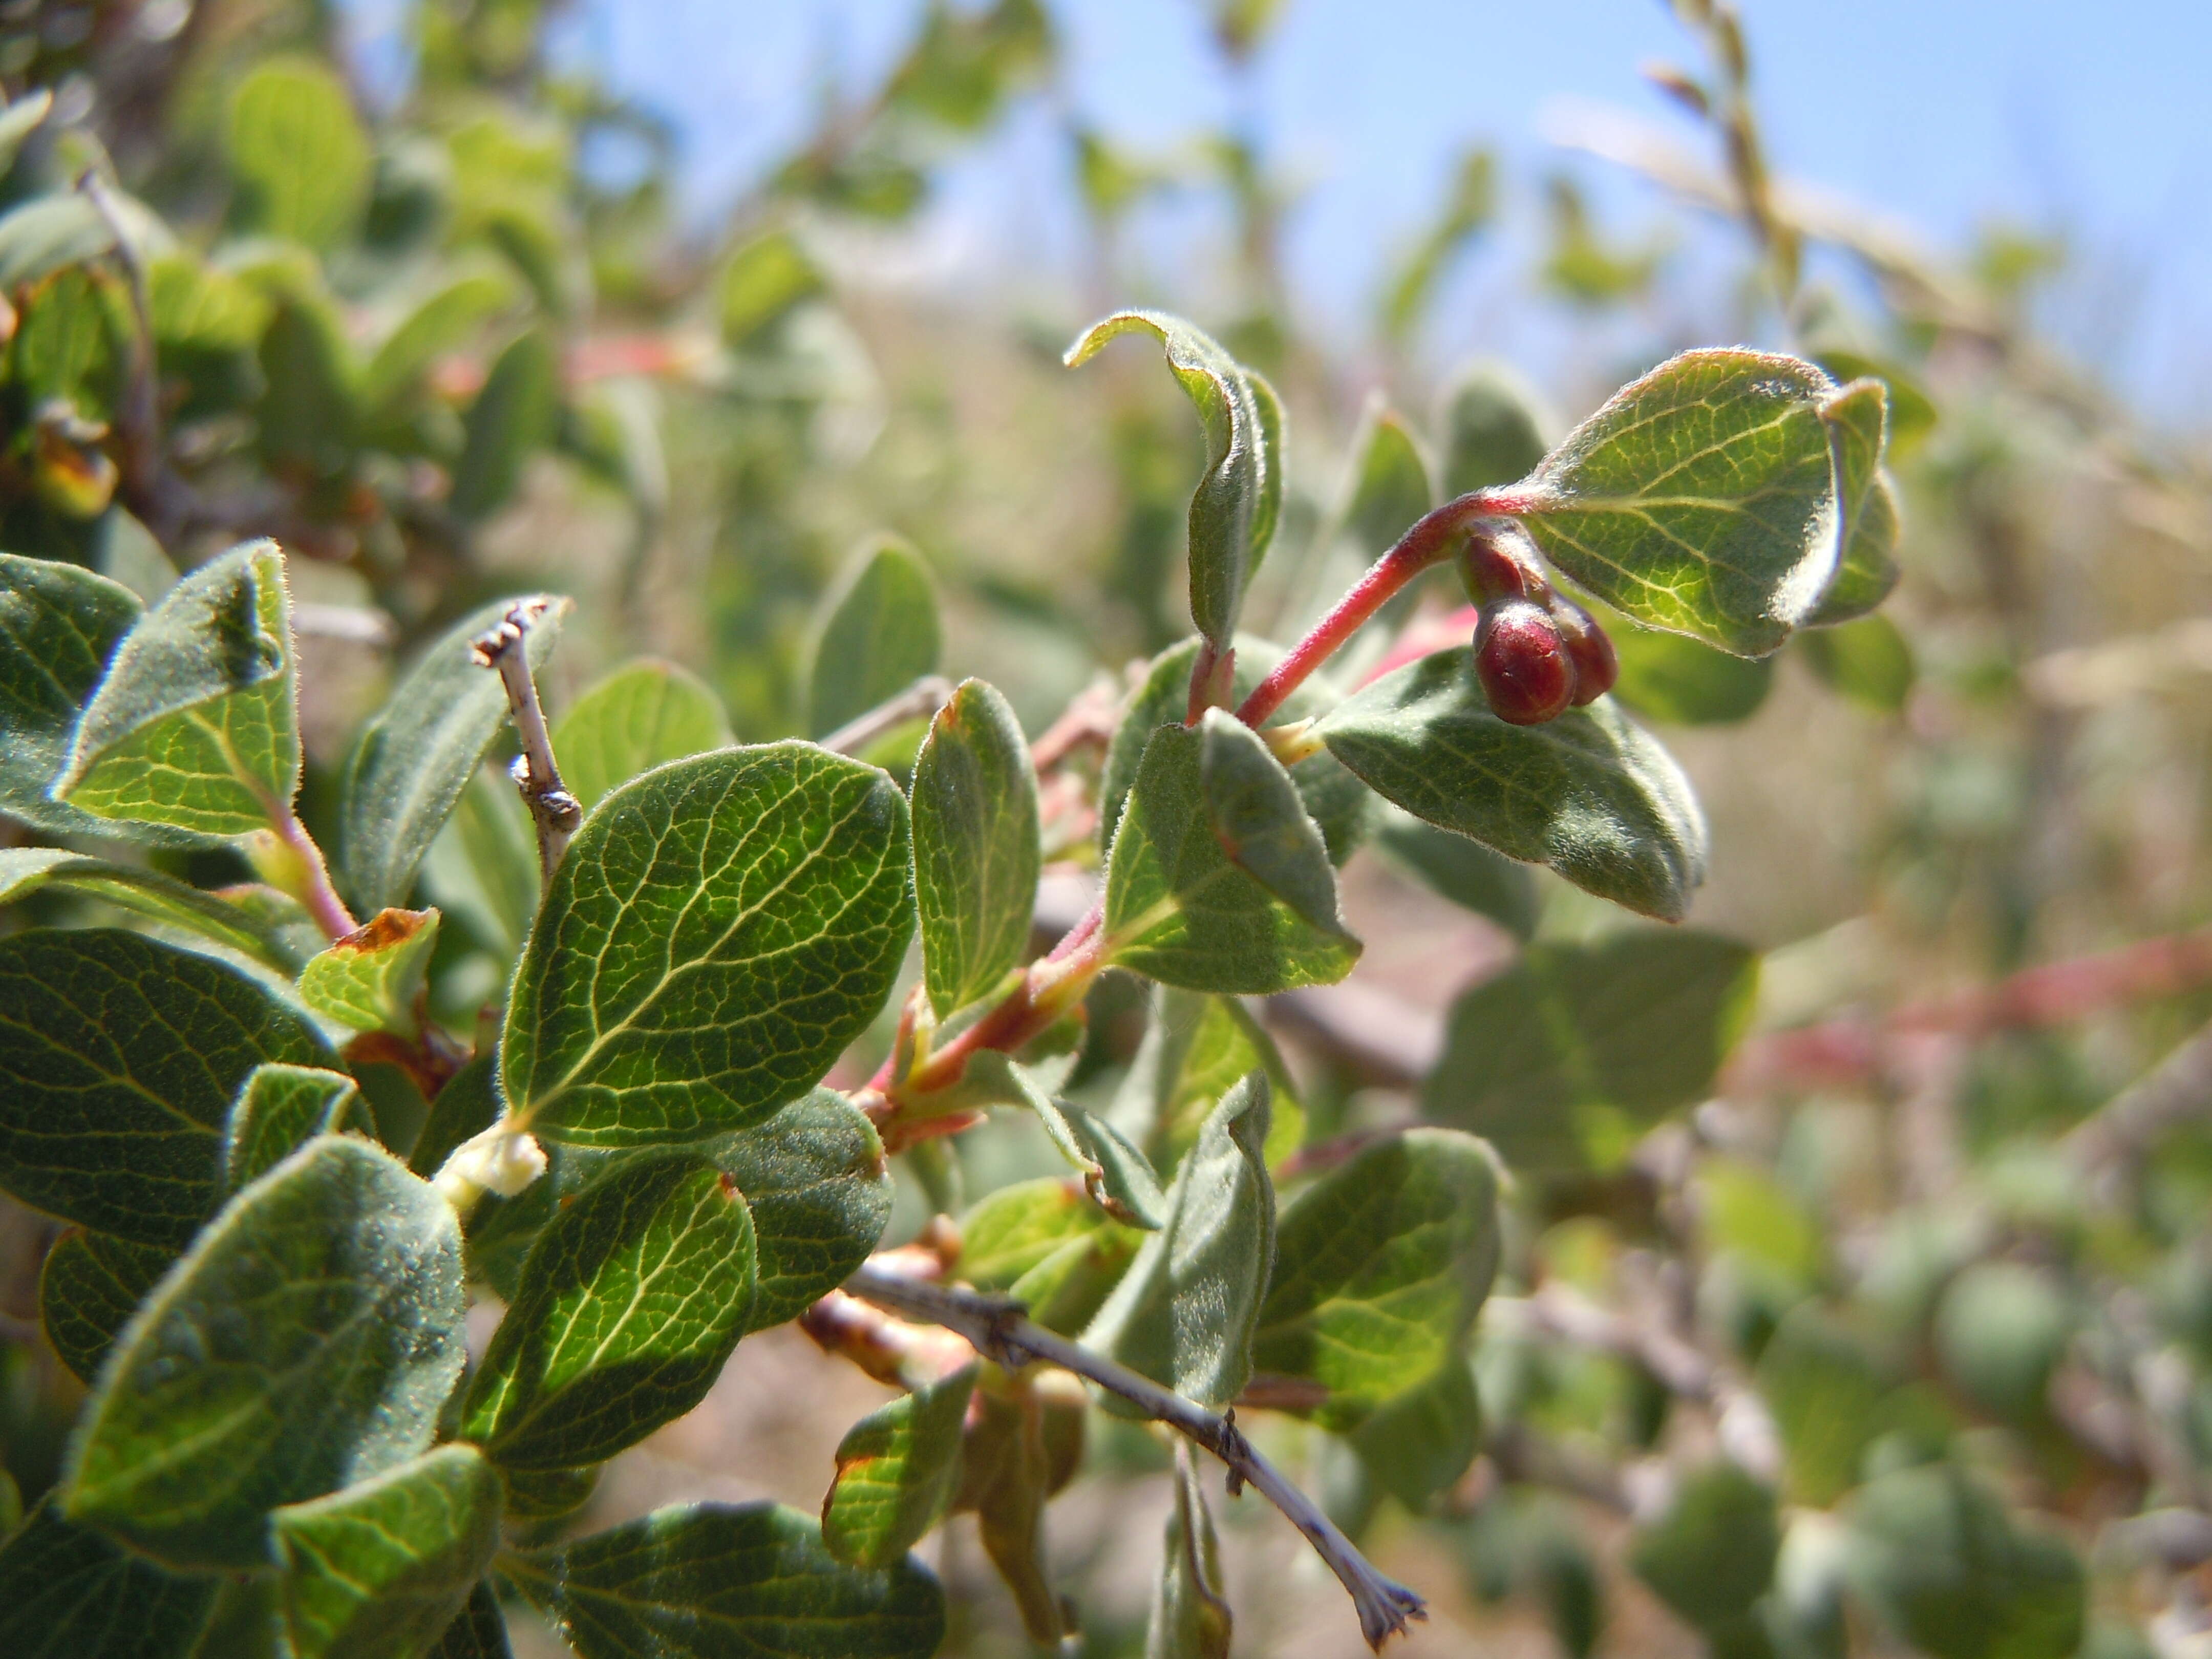 Image of mountain snowberry